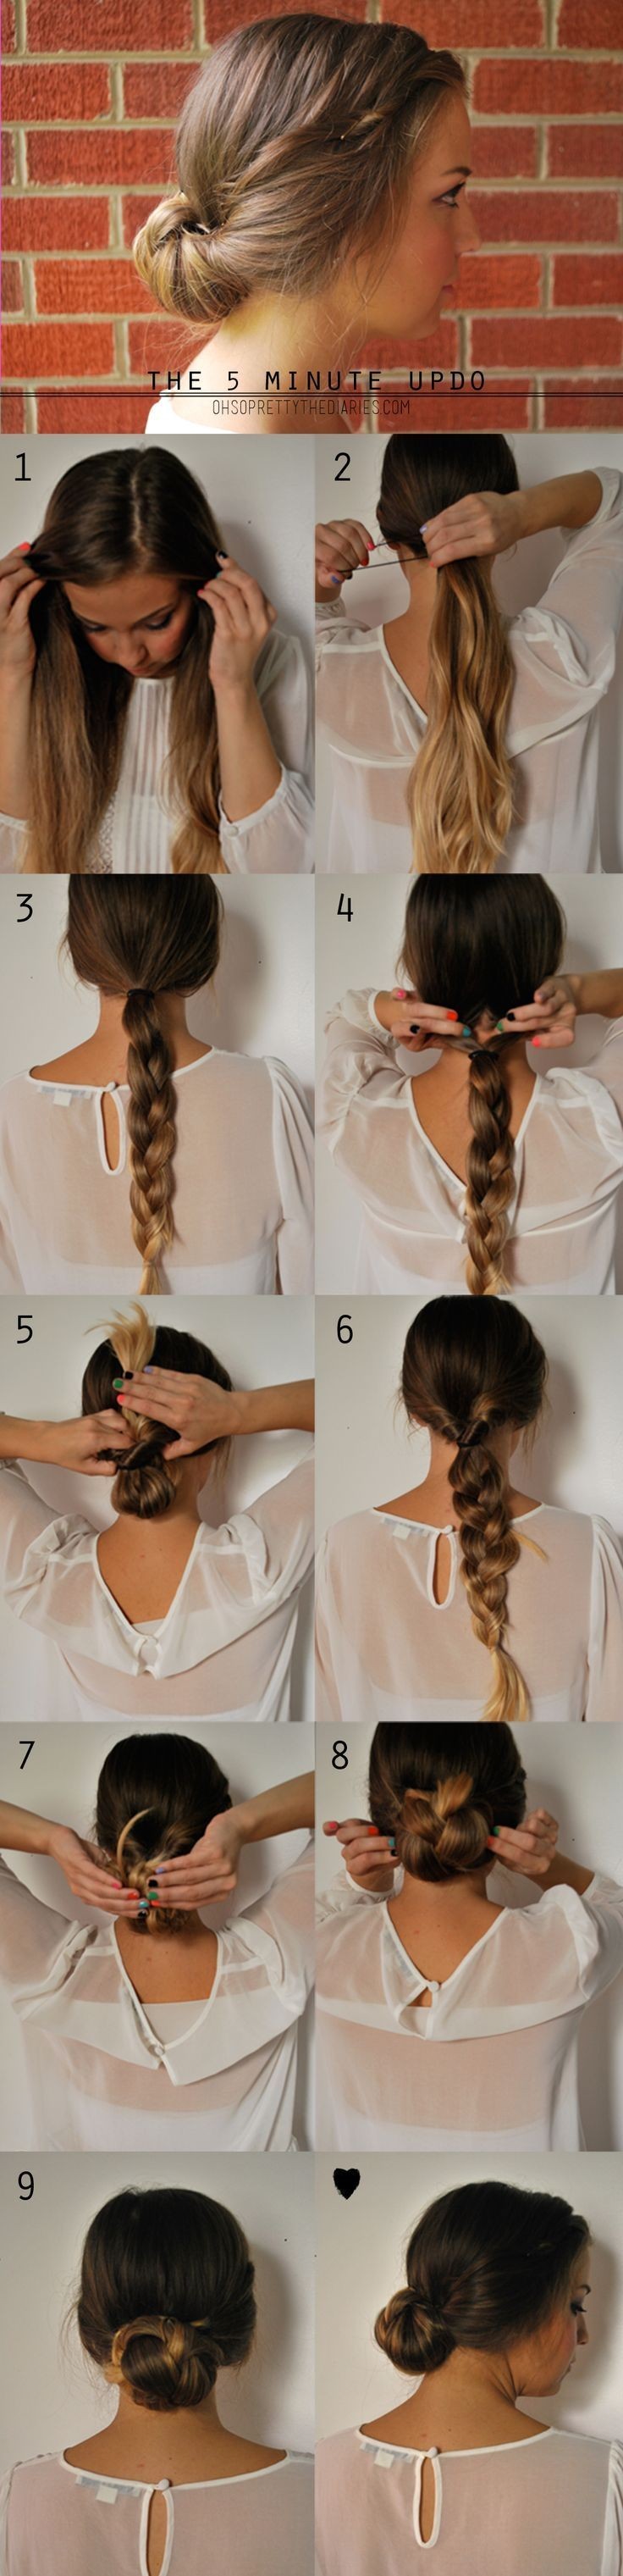 15 Cute Hairstyles Step By Step Hairstyles For Long Hair PoPular